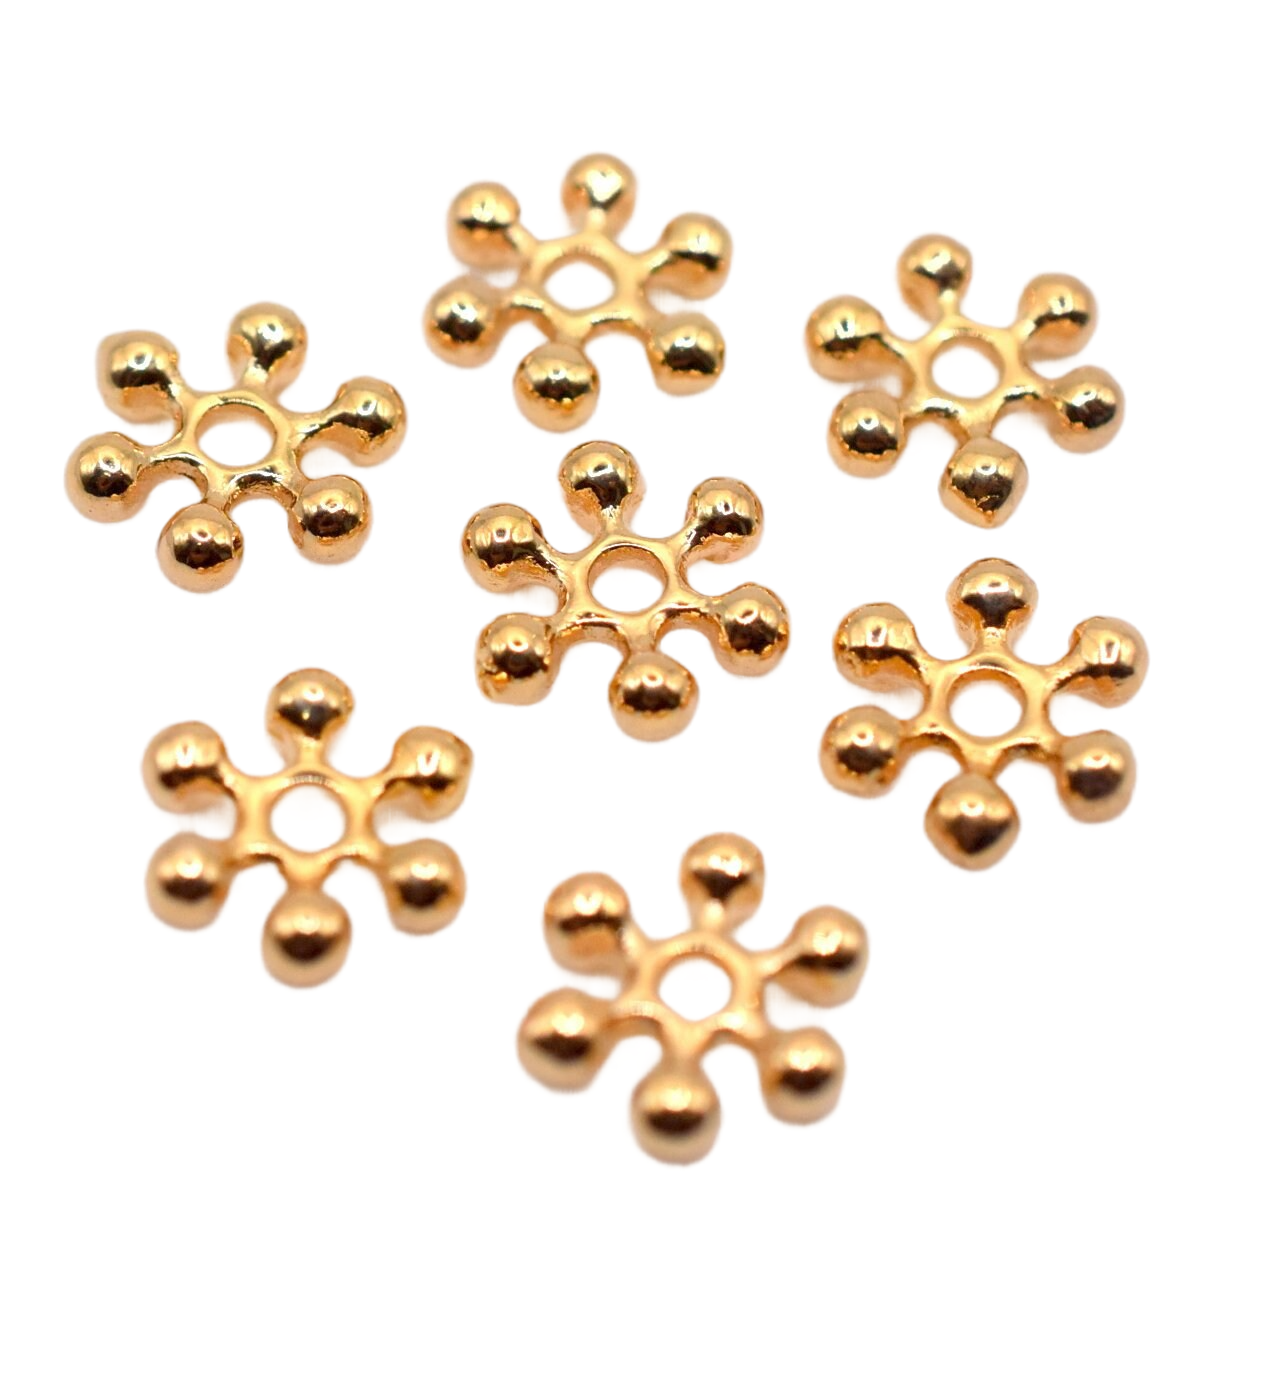 18K Gold Filled Rondel Flower Spacer Beads  Various Sizes 7mm, 4mm,6mm,8mm Beads Jewelry USA Seller Sold 12 PCs/ PK